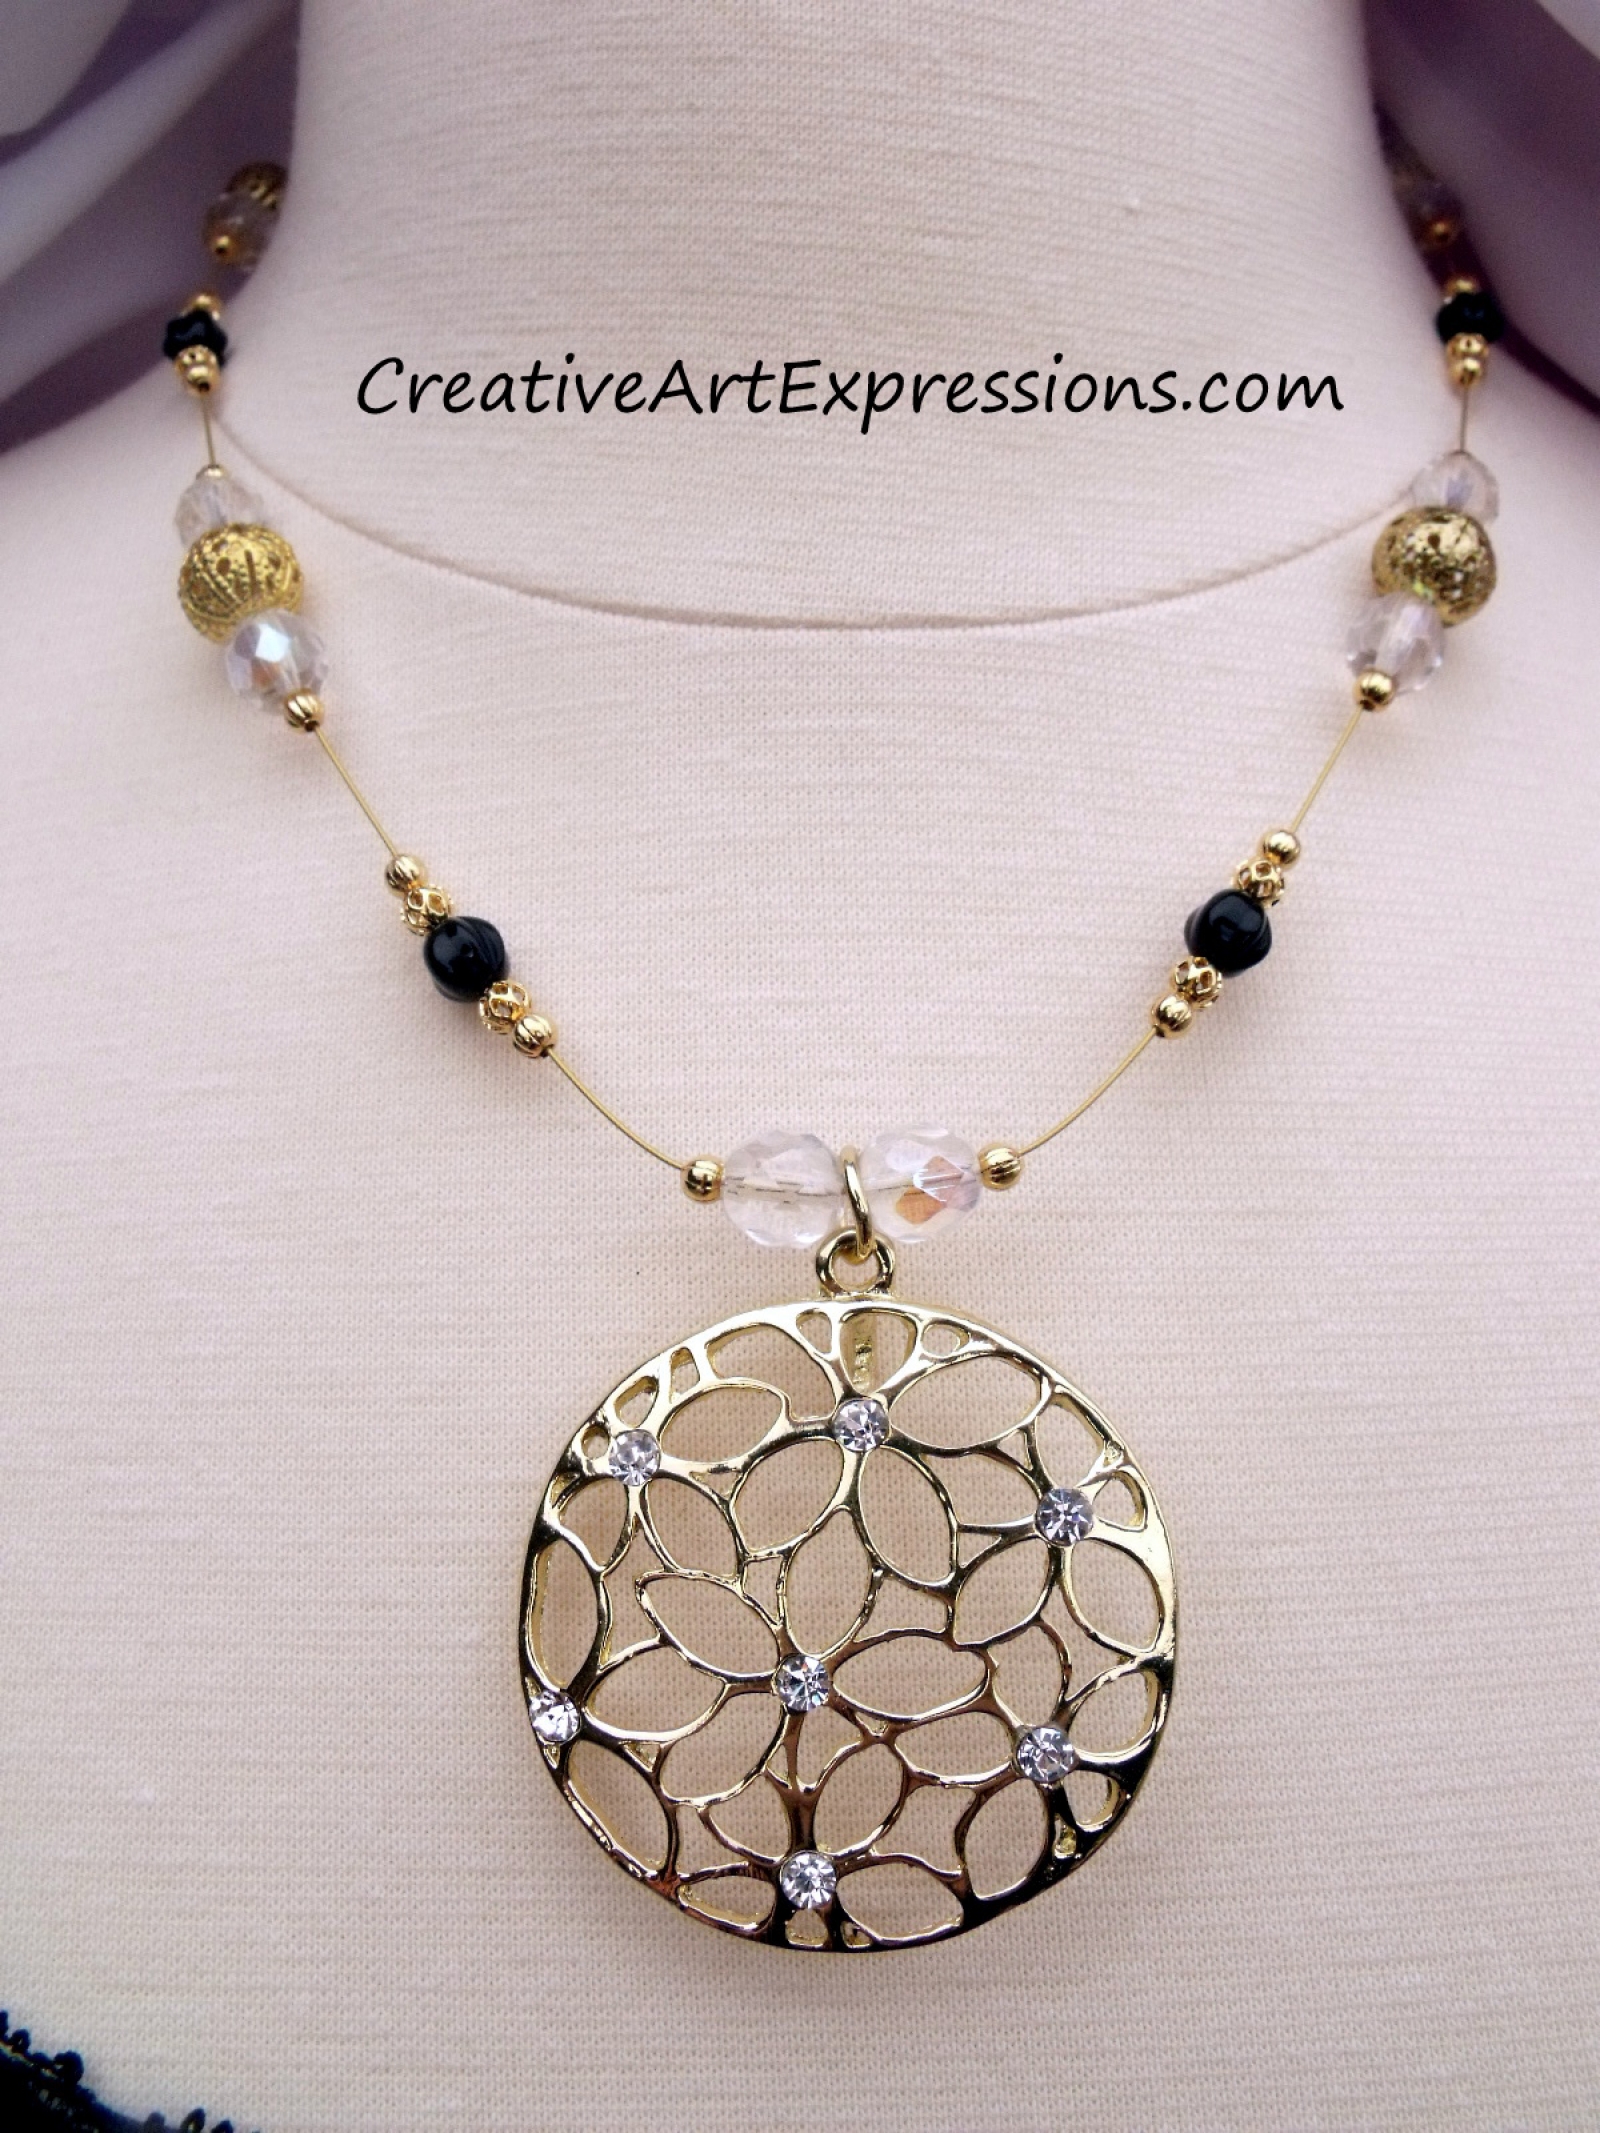 Creative Art Expressions Handmade Gold Black & Crystal Necklace Jewelry